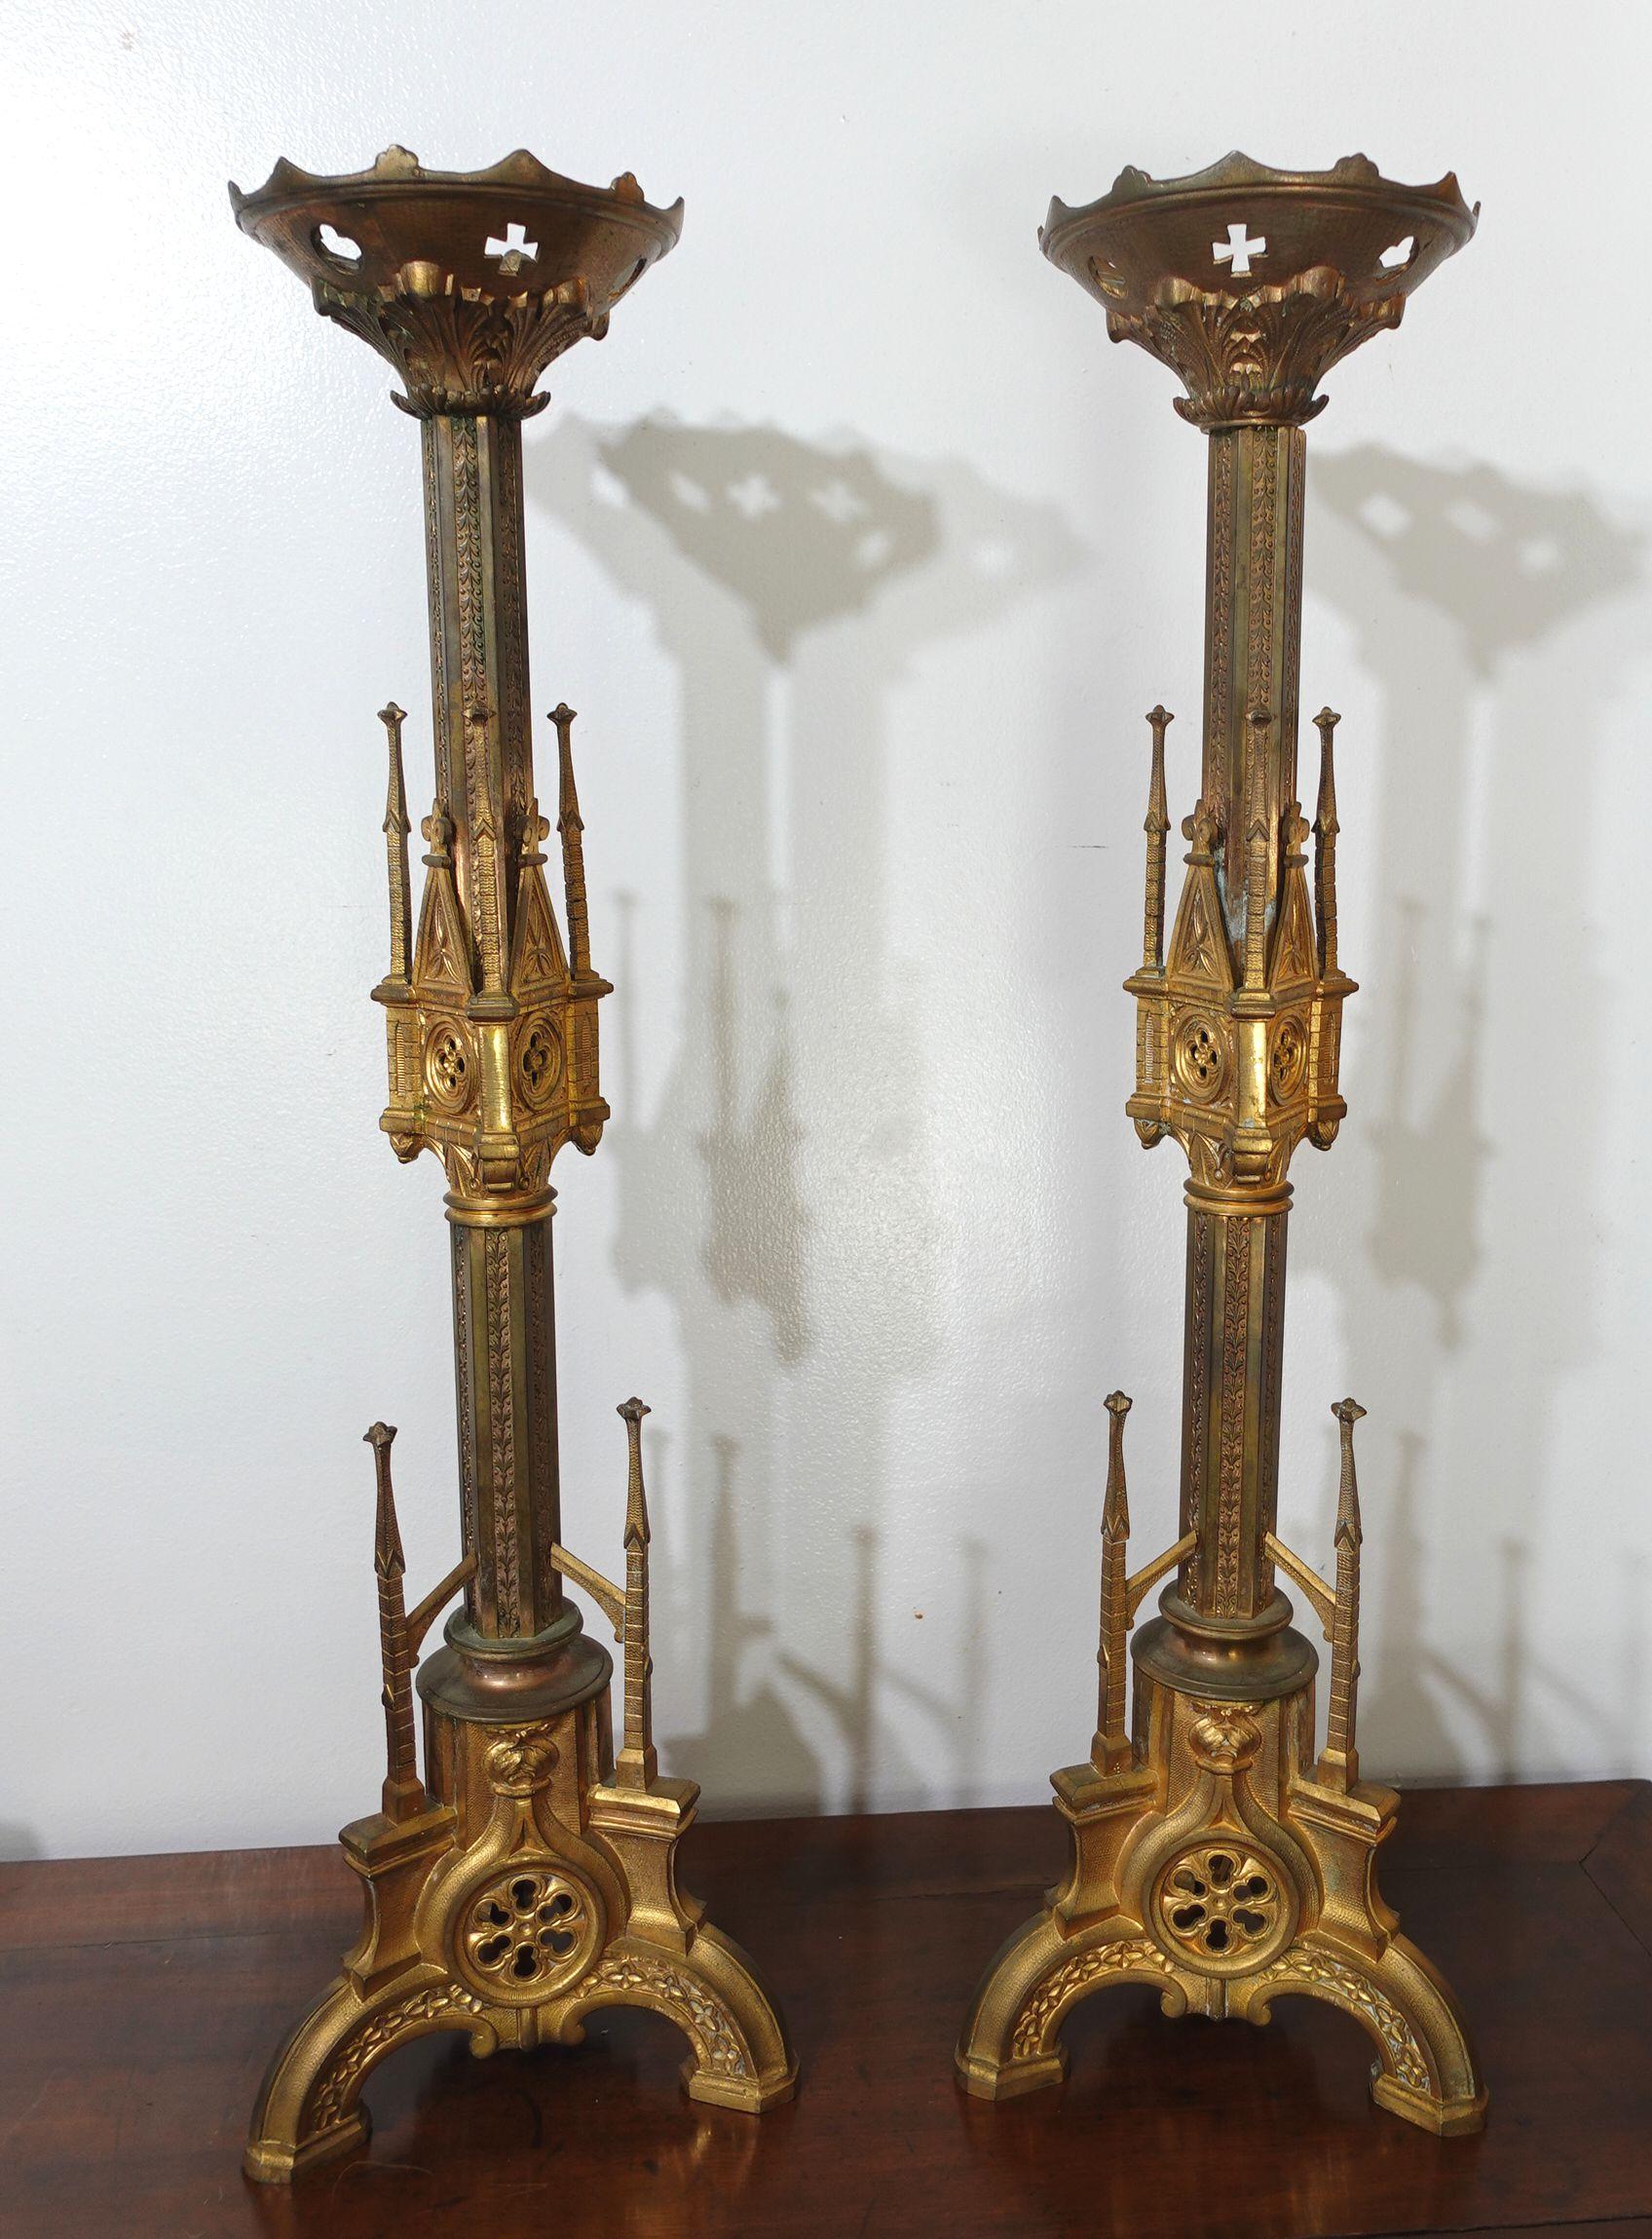 Large antique pair of Gothic Cathedral Motif brass prickets - Church/Altar candlesticks with gothic architectural design elements.
Ric.0043.
   